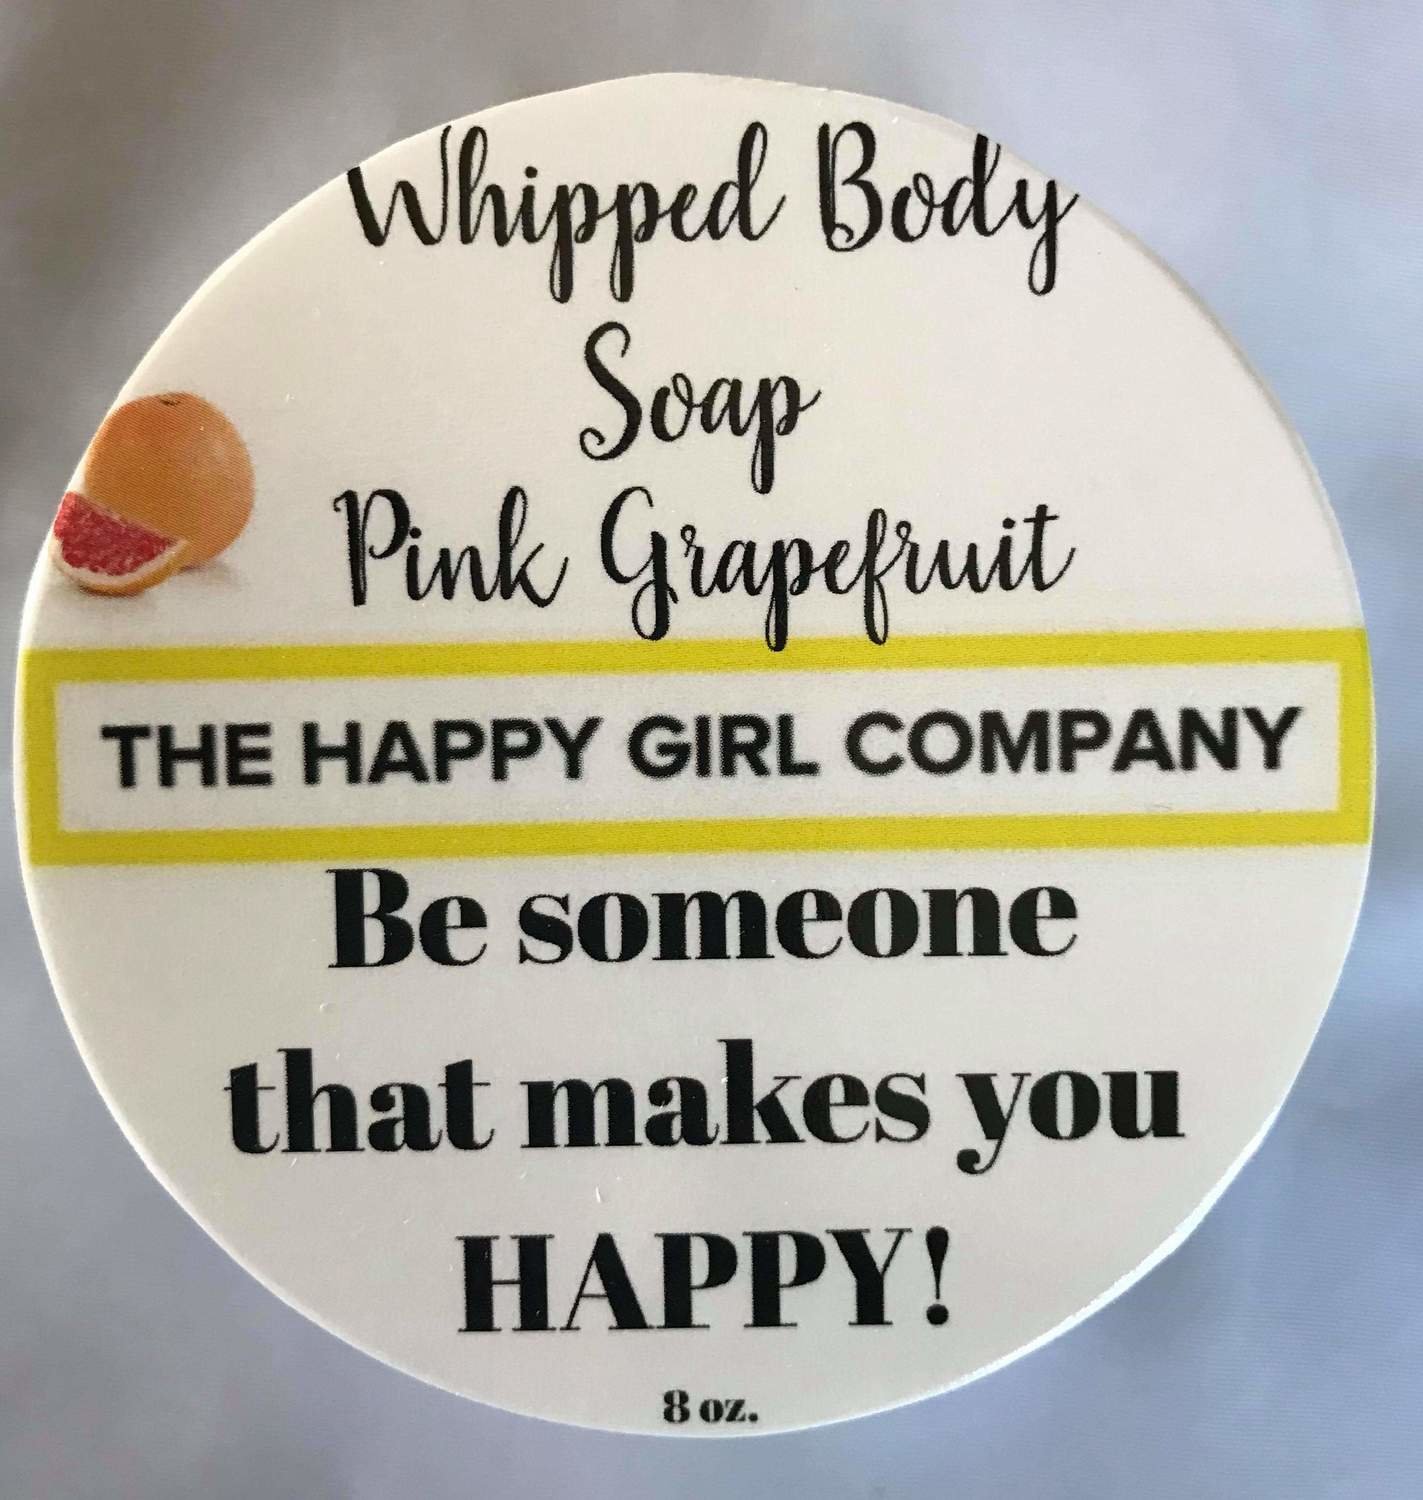 Pink Grapefruit Whipped Body Soap